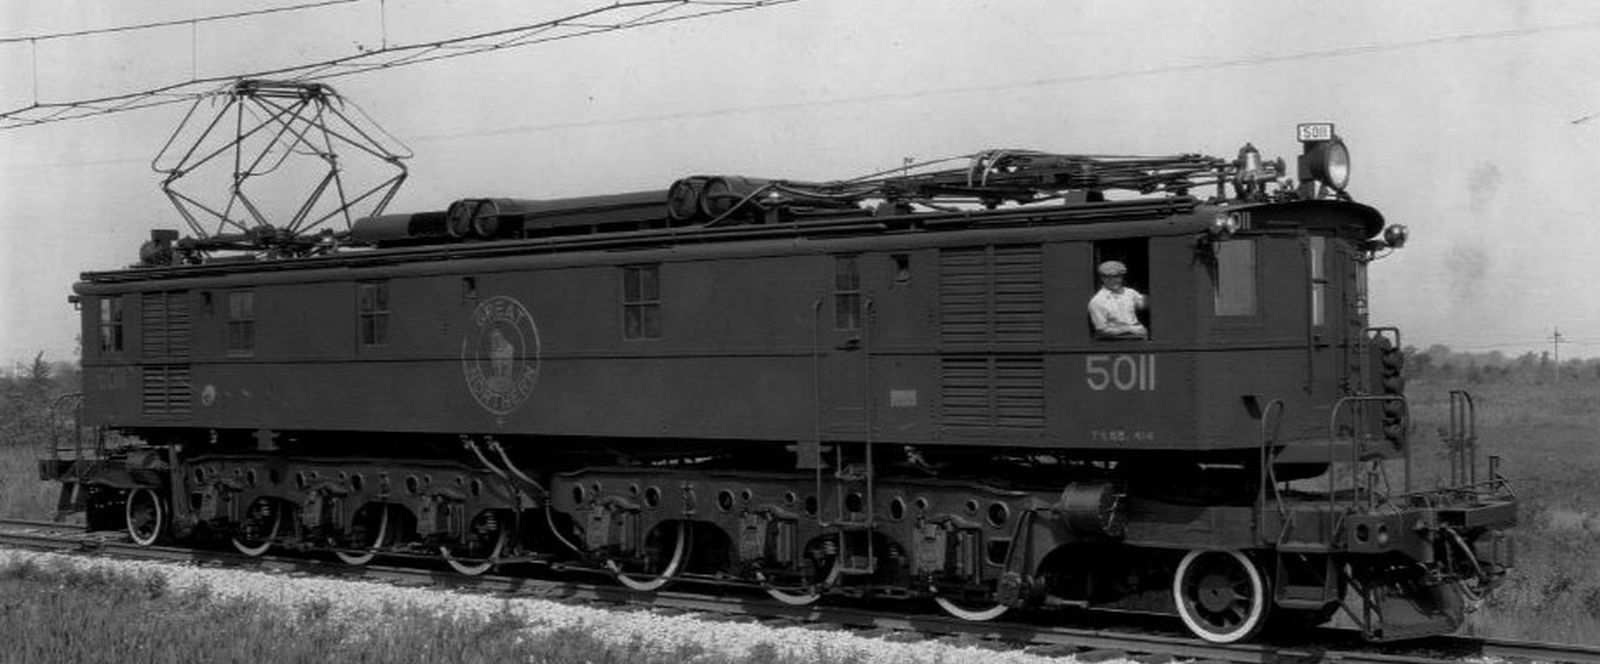 No. 5011 in a photo from 1927